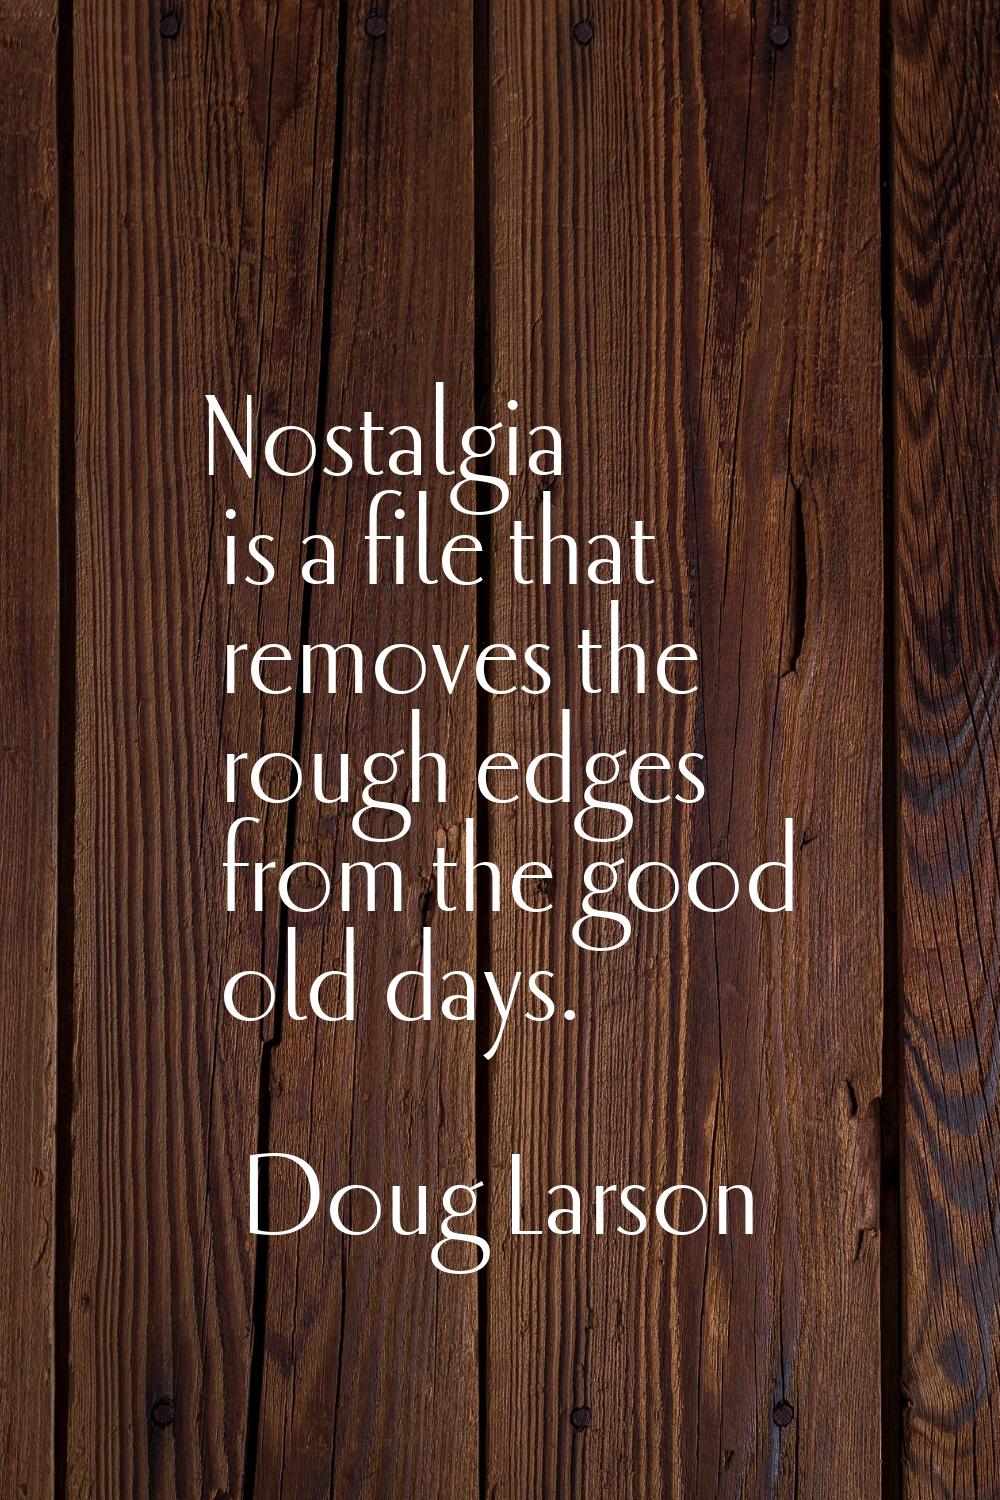 Nostalgia is a file that removes the rough edges from the good old days.